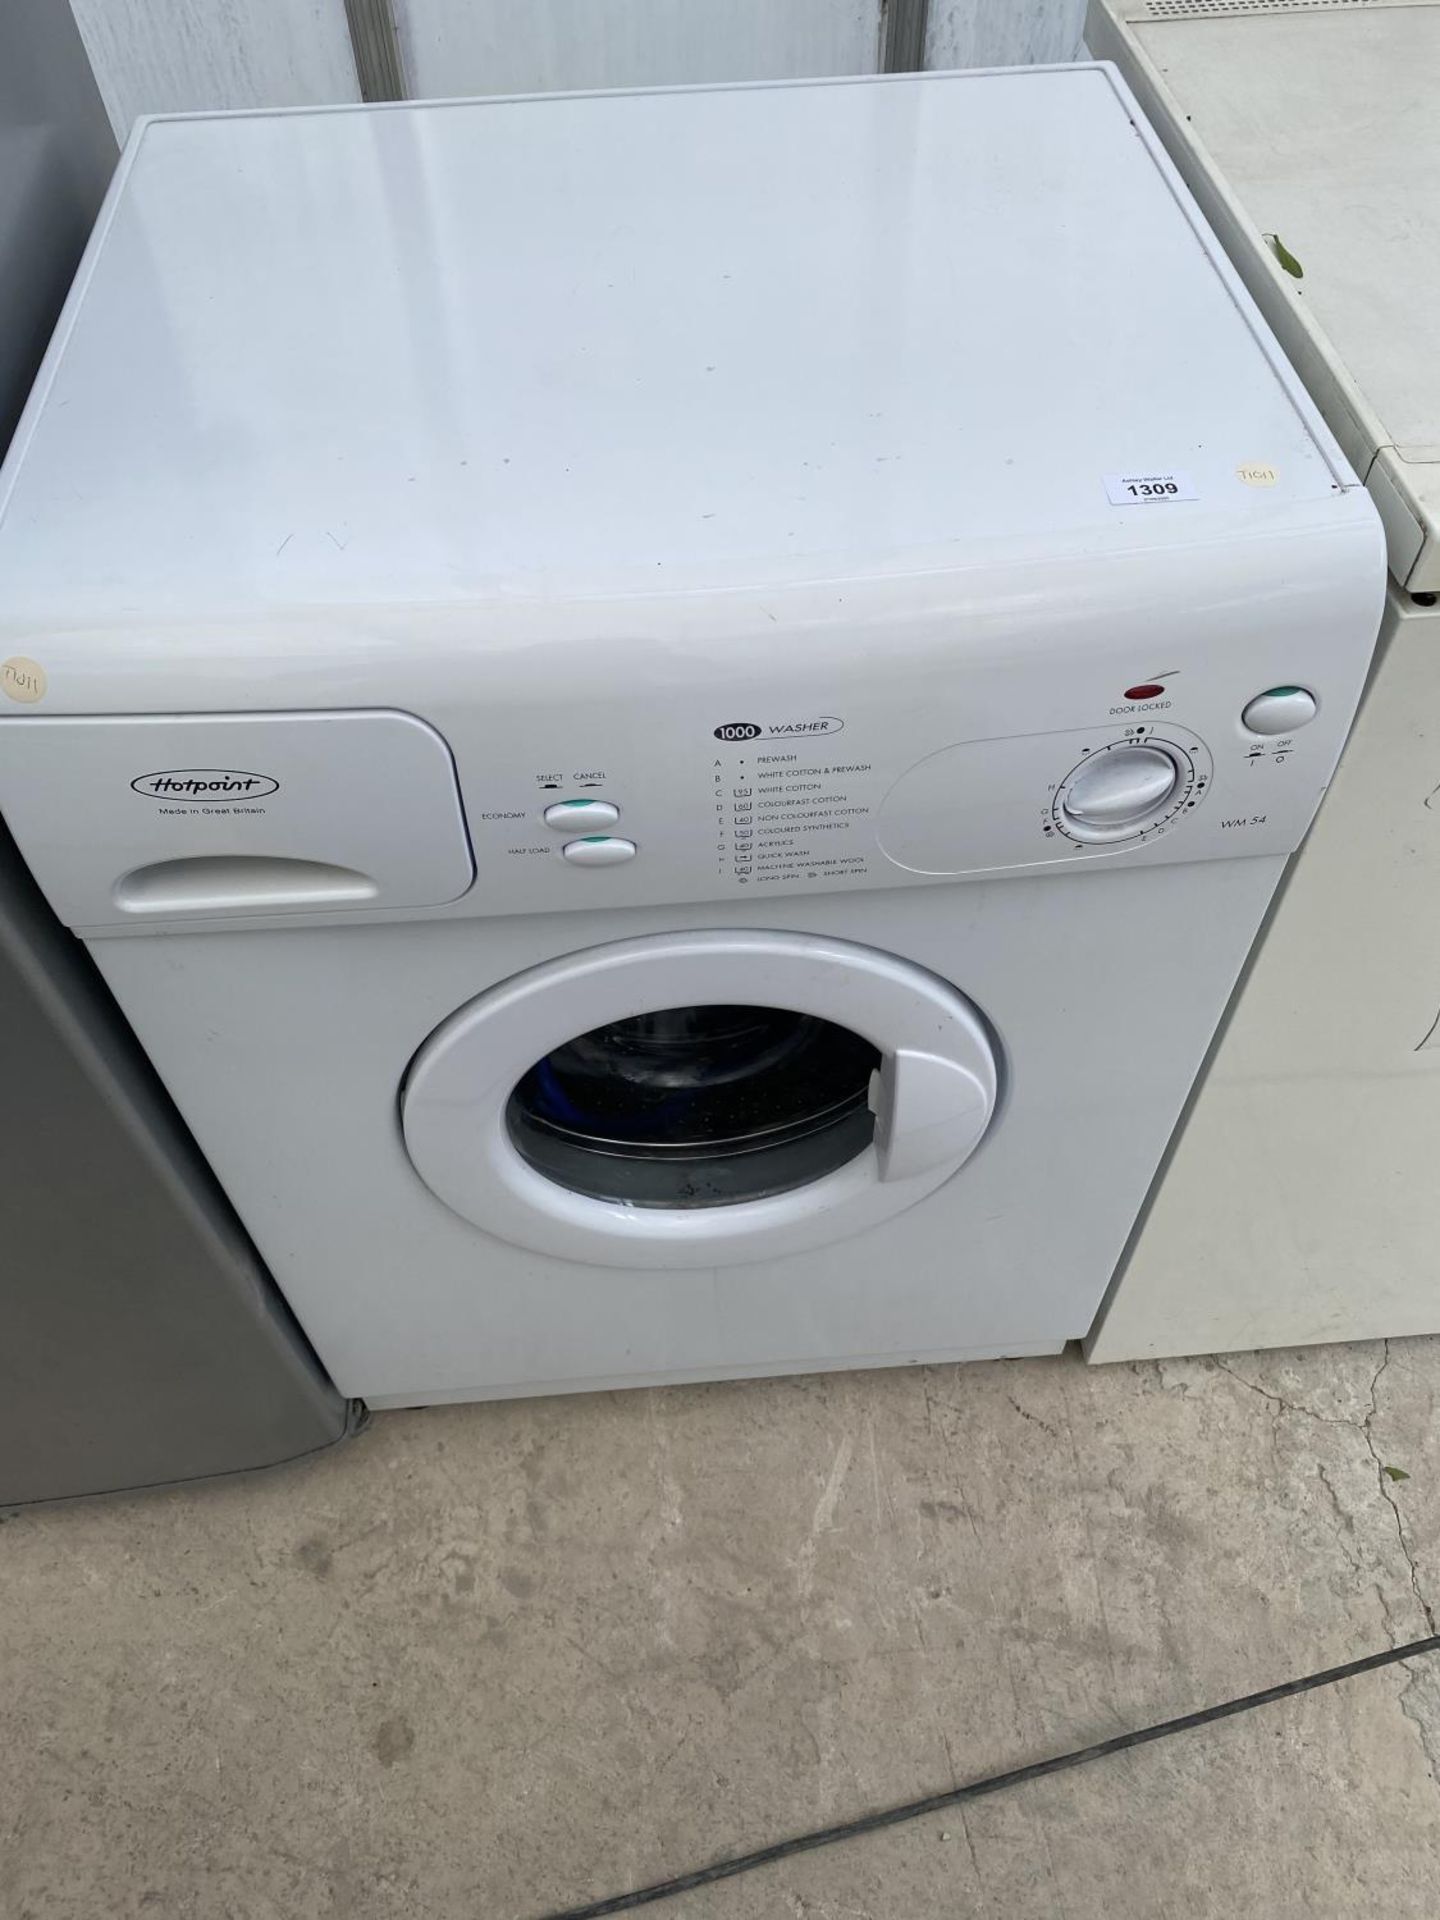 A HOTPOINT WM54 WASHING MACHINE IN CLEAN AND WORKING ORDER